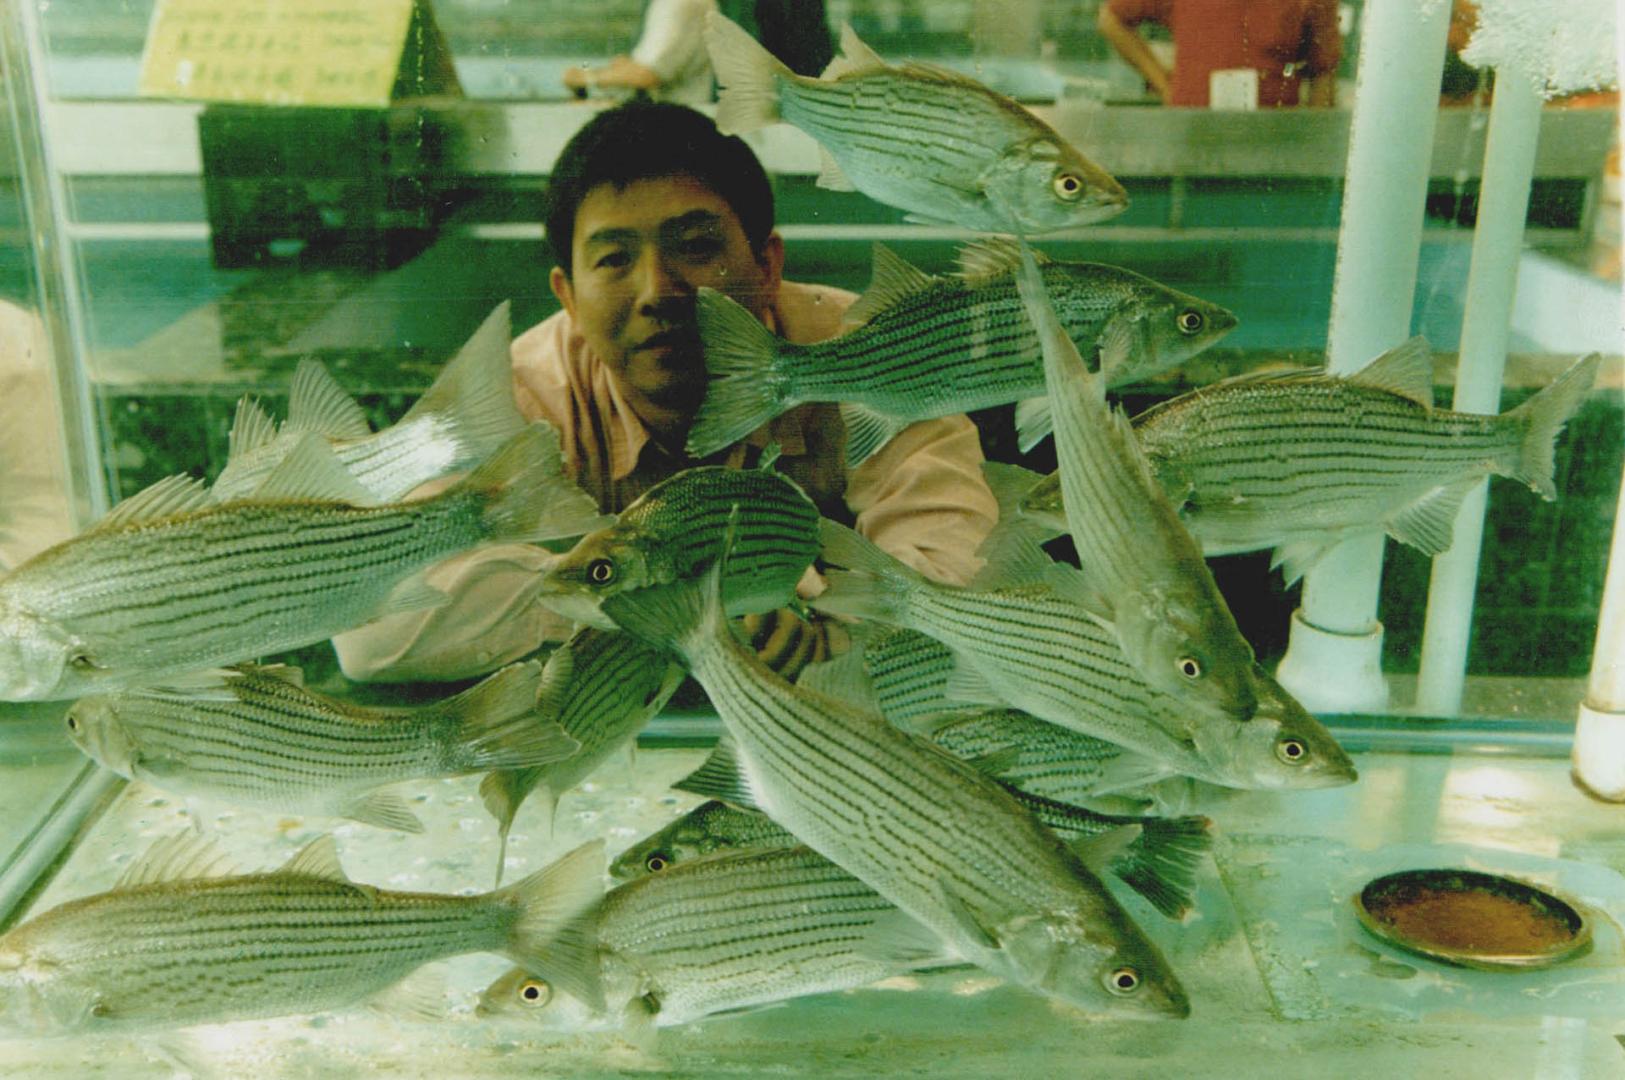 Eng Lam, co-owner of Big Land Farm, is proud of his store's vast seafood department, where the fish is truly fresh